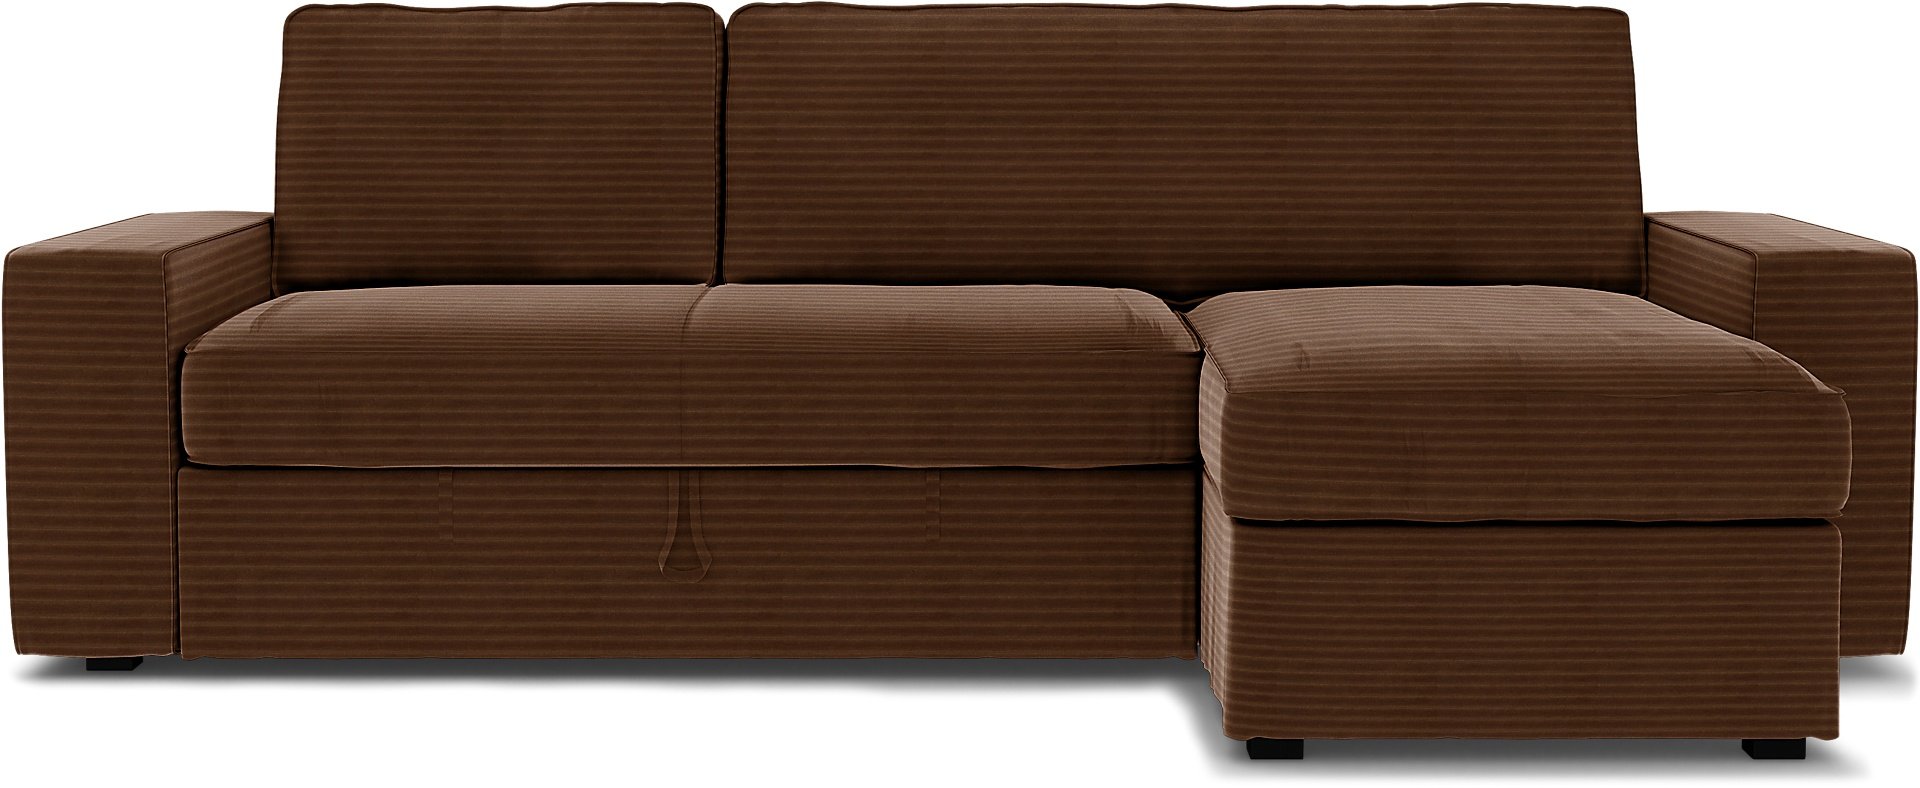 IKEA - Vilasund sofa bed with chaise cover, Chocolate Brown, Corduroy - Bemz